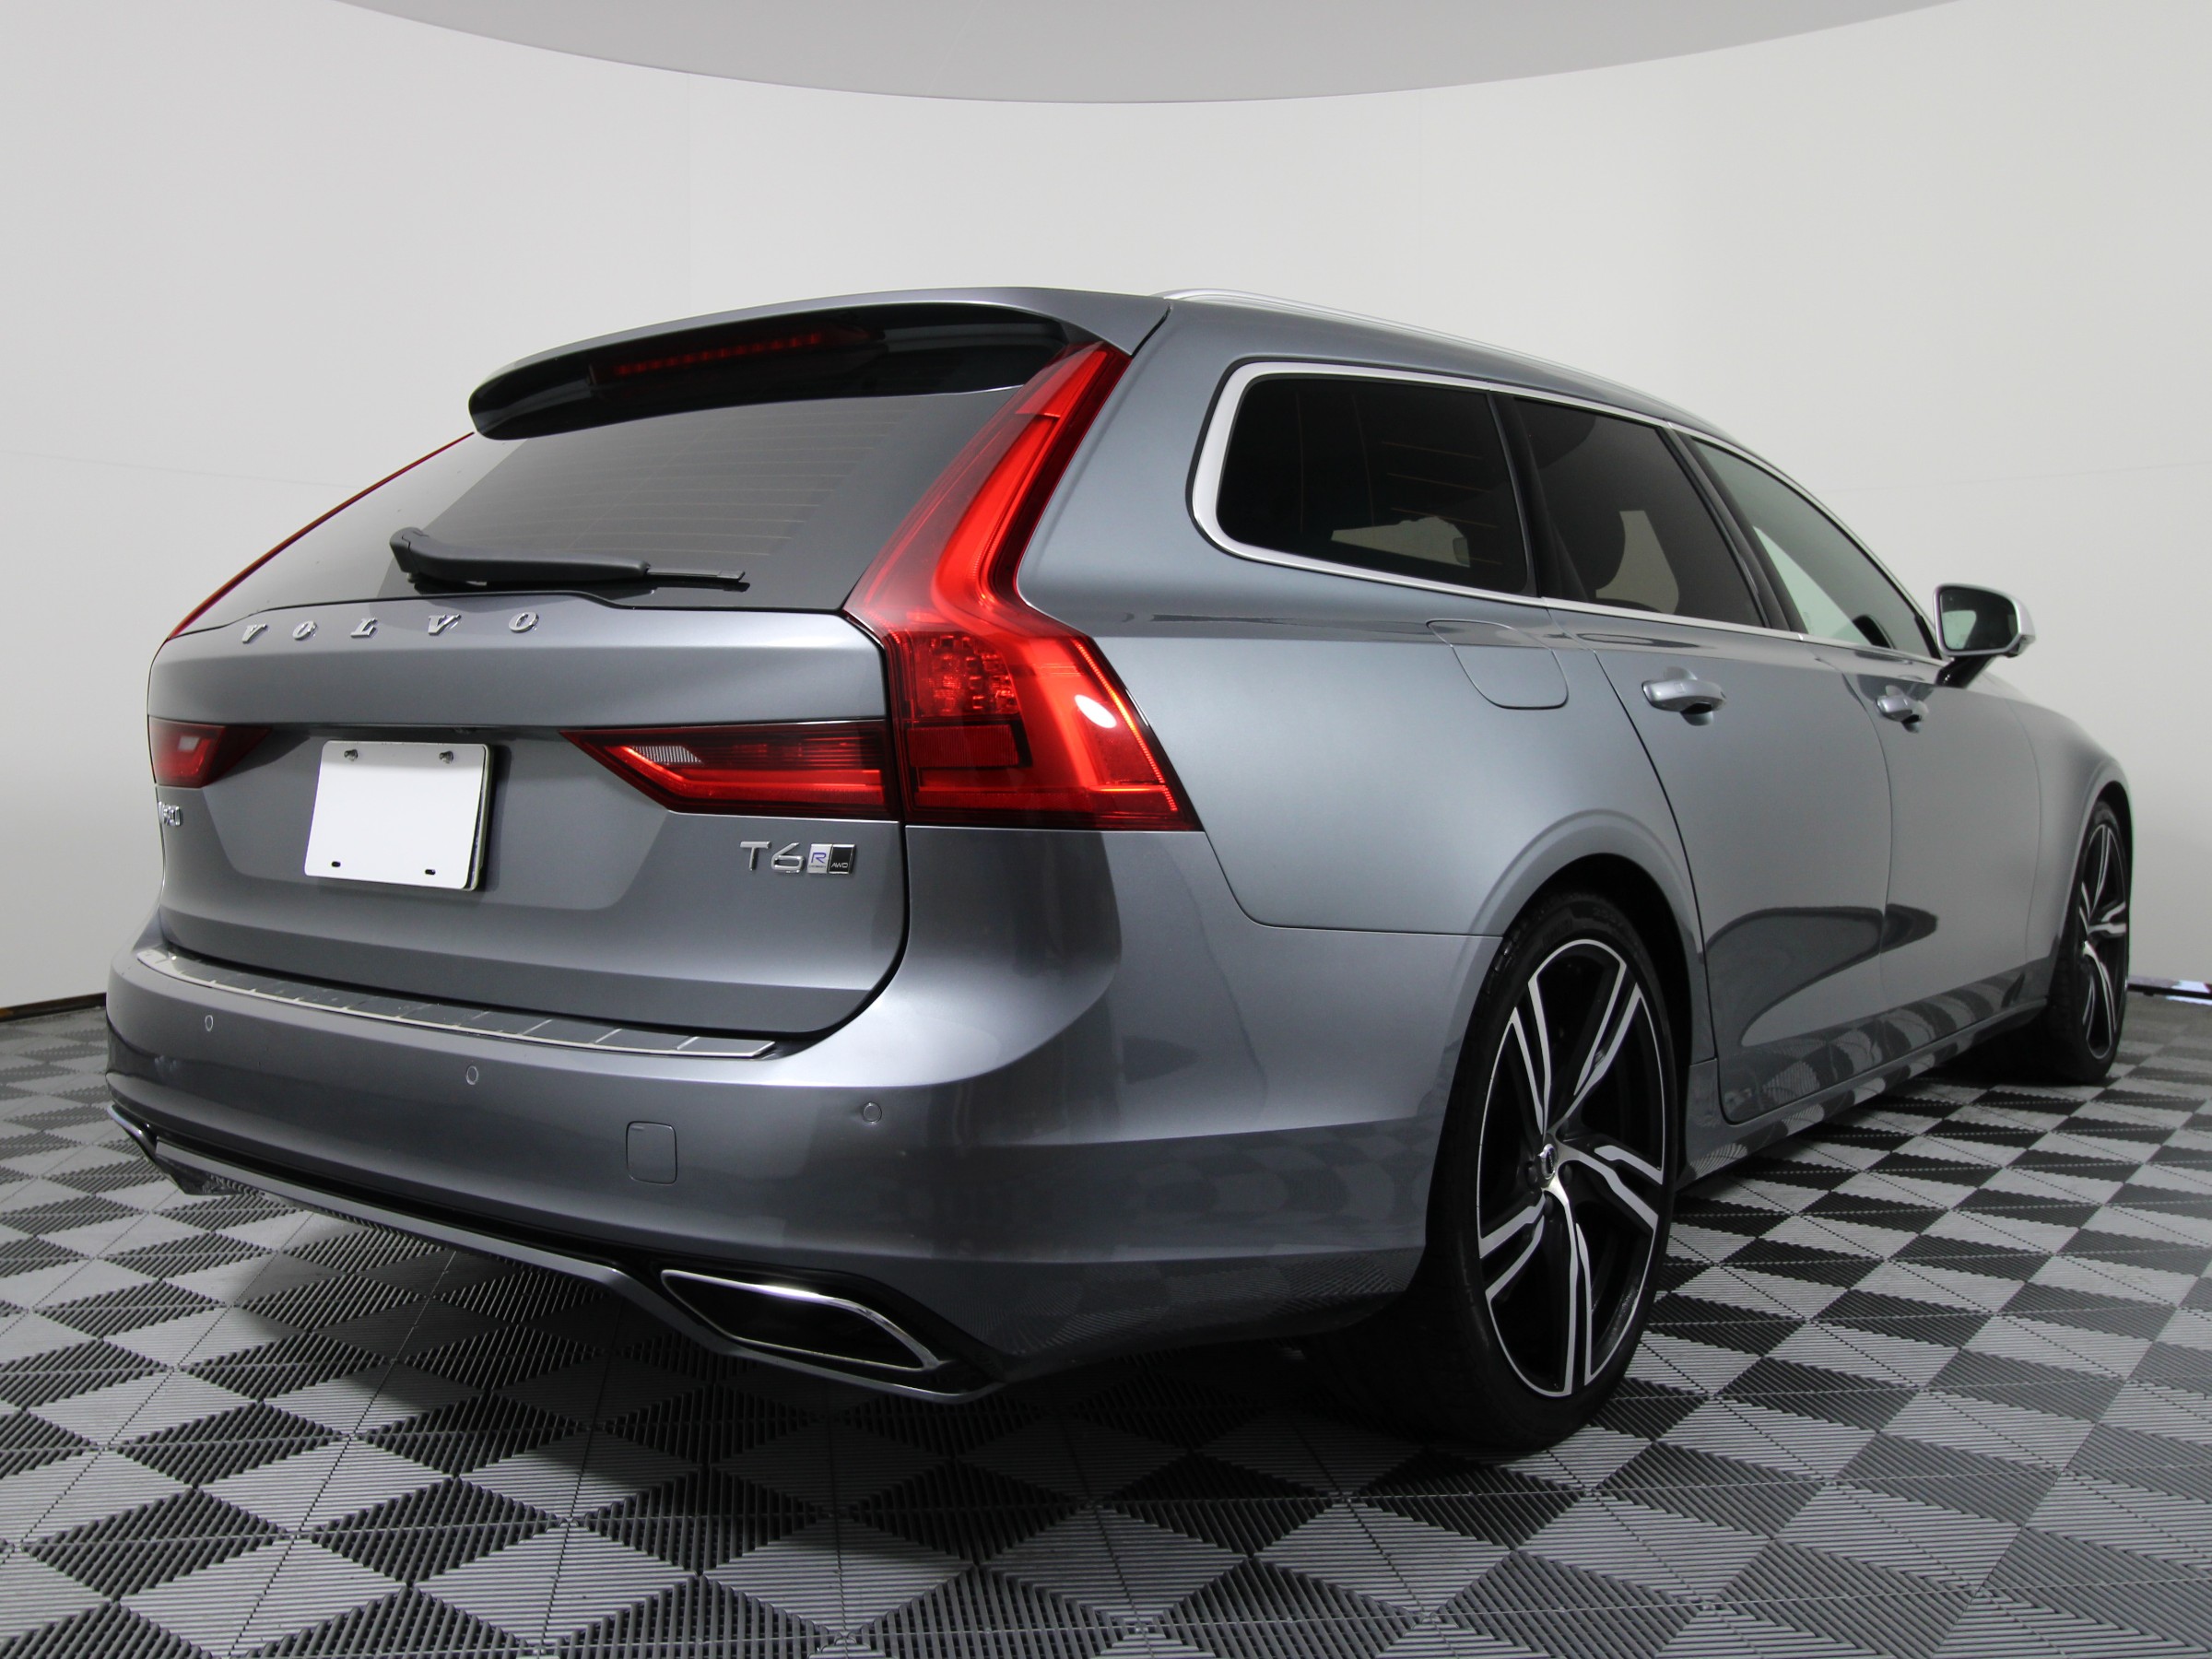 Certified PreOwned 2018 Volvo V90 T6 RDesign AWD